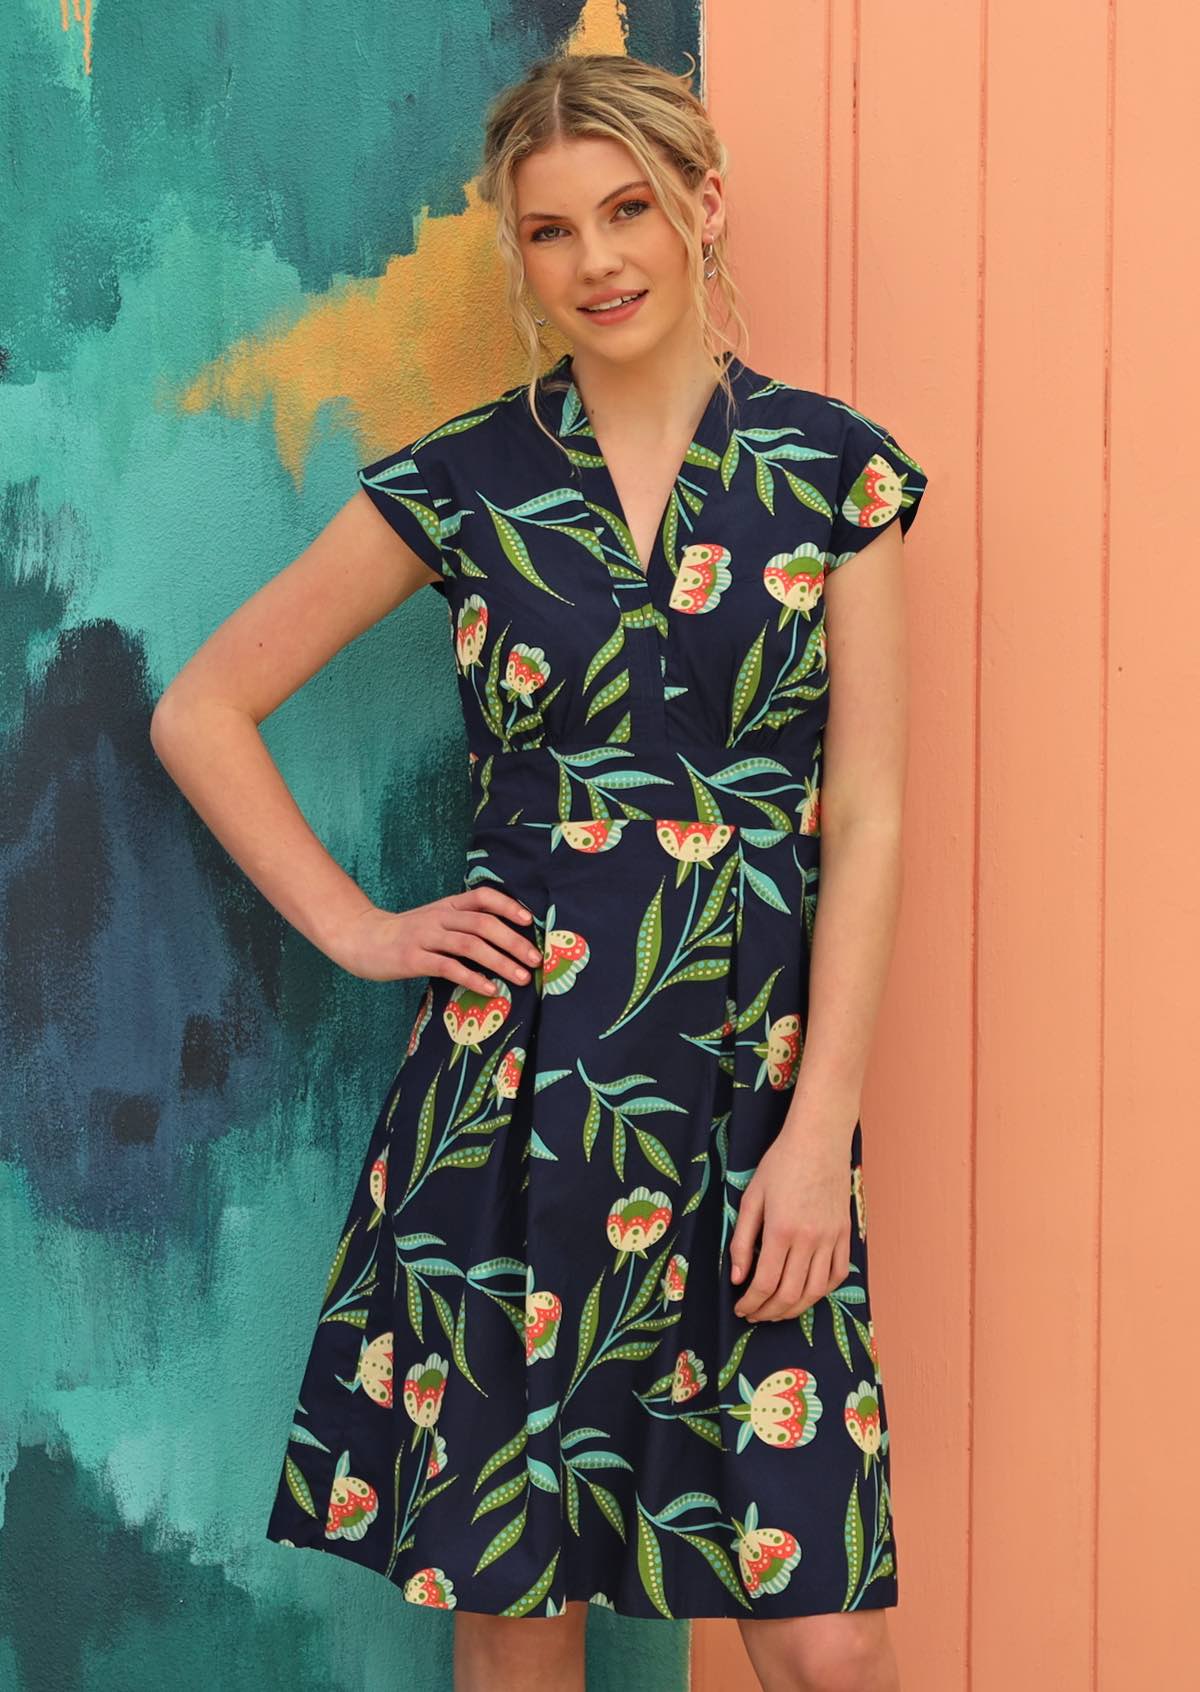 Model wears navy based dress with green floral pattern. 